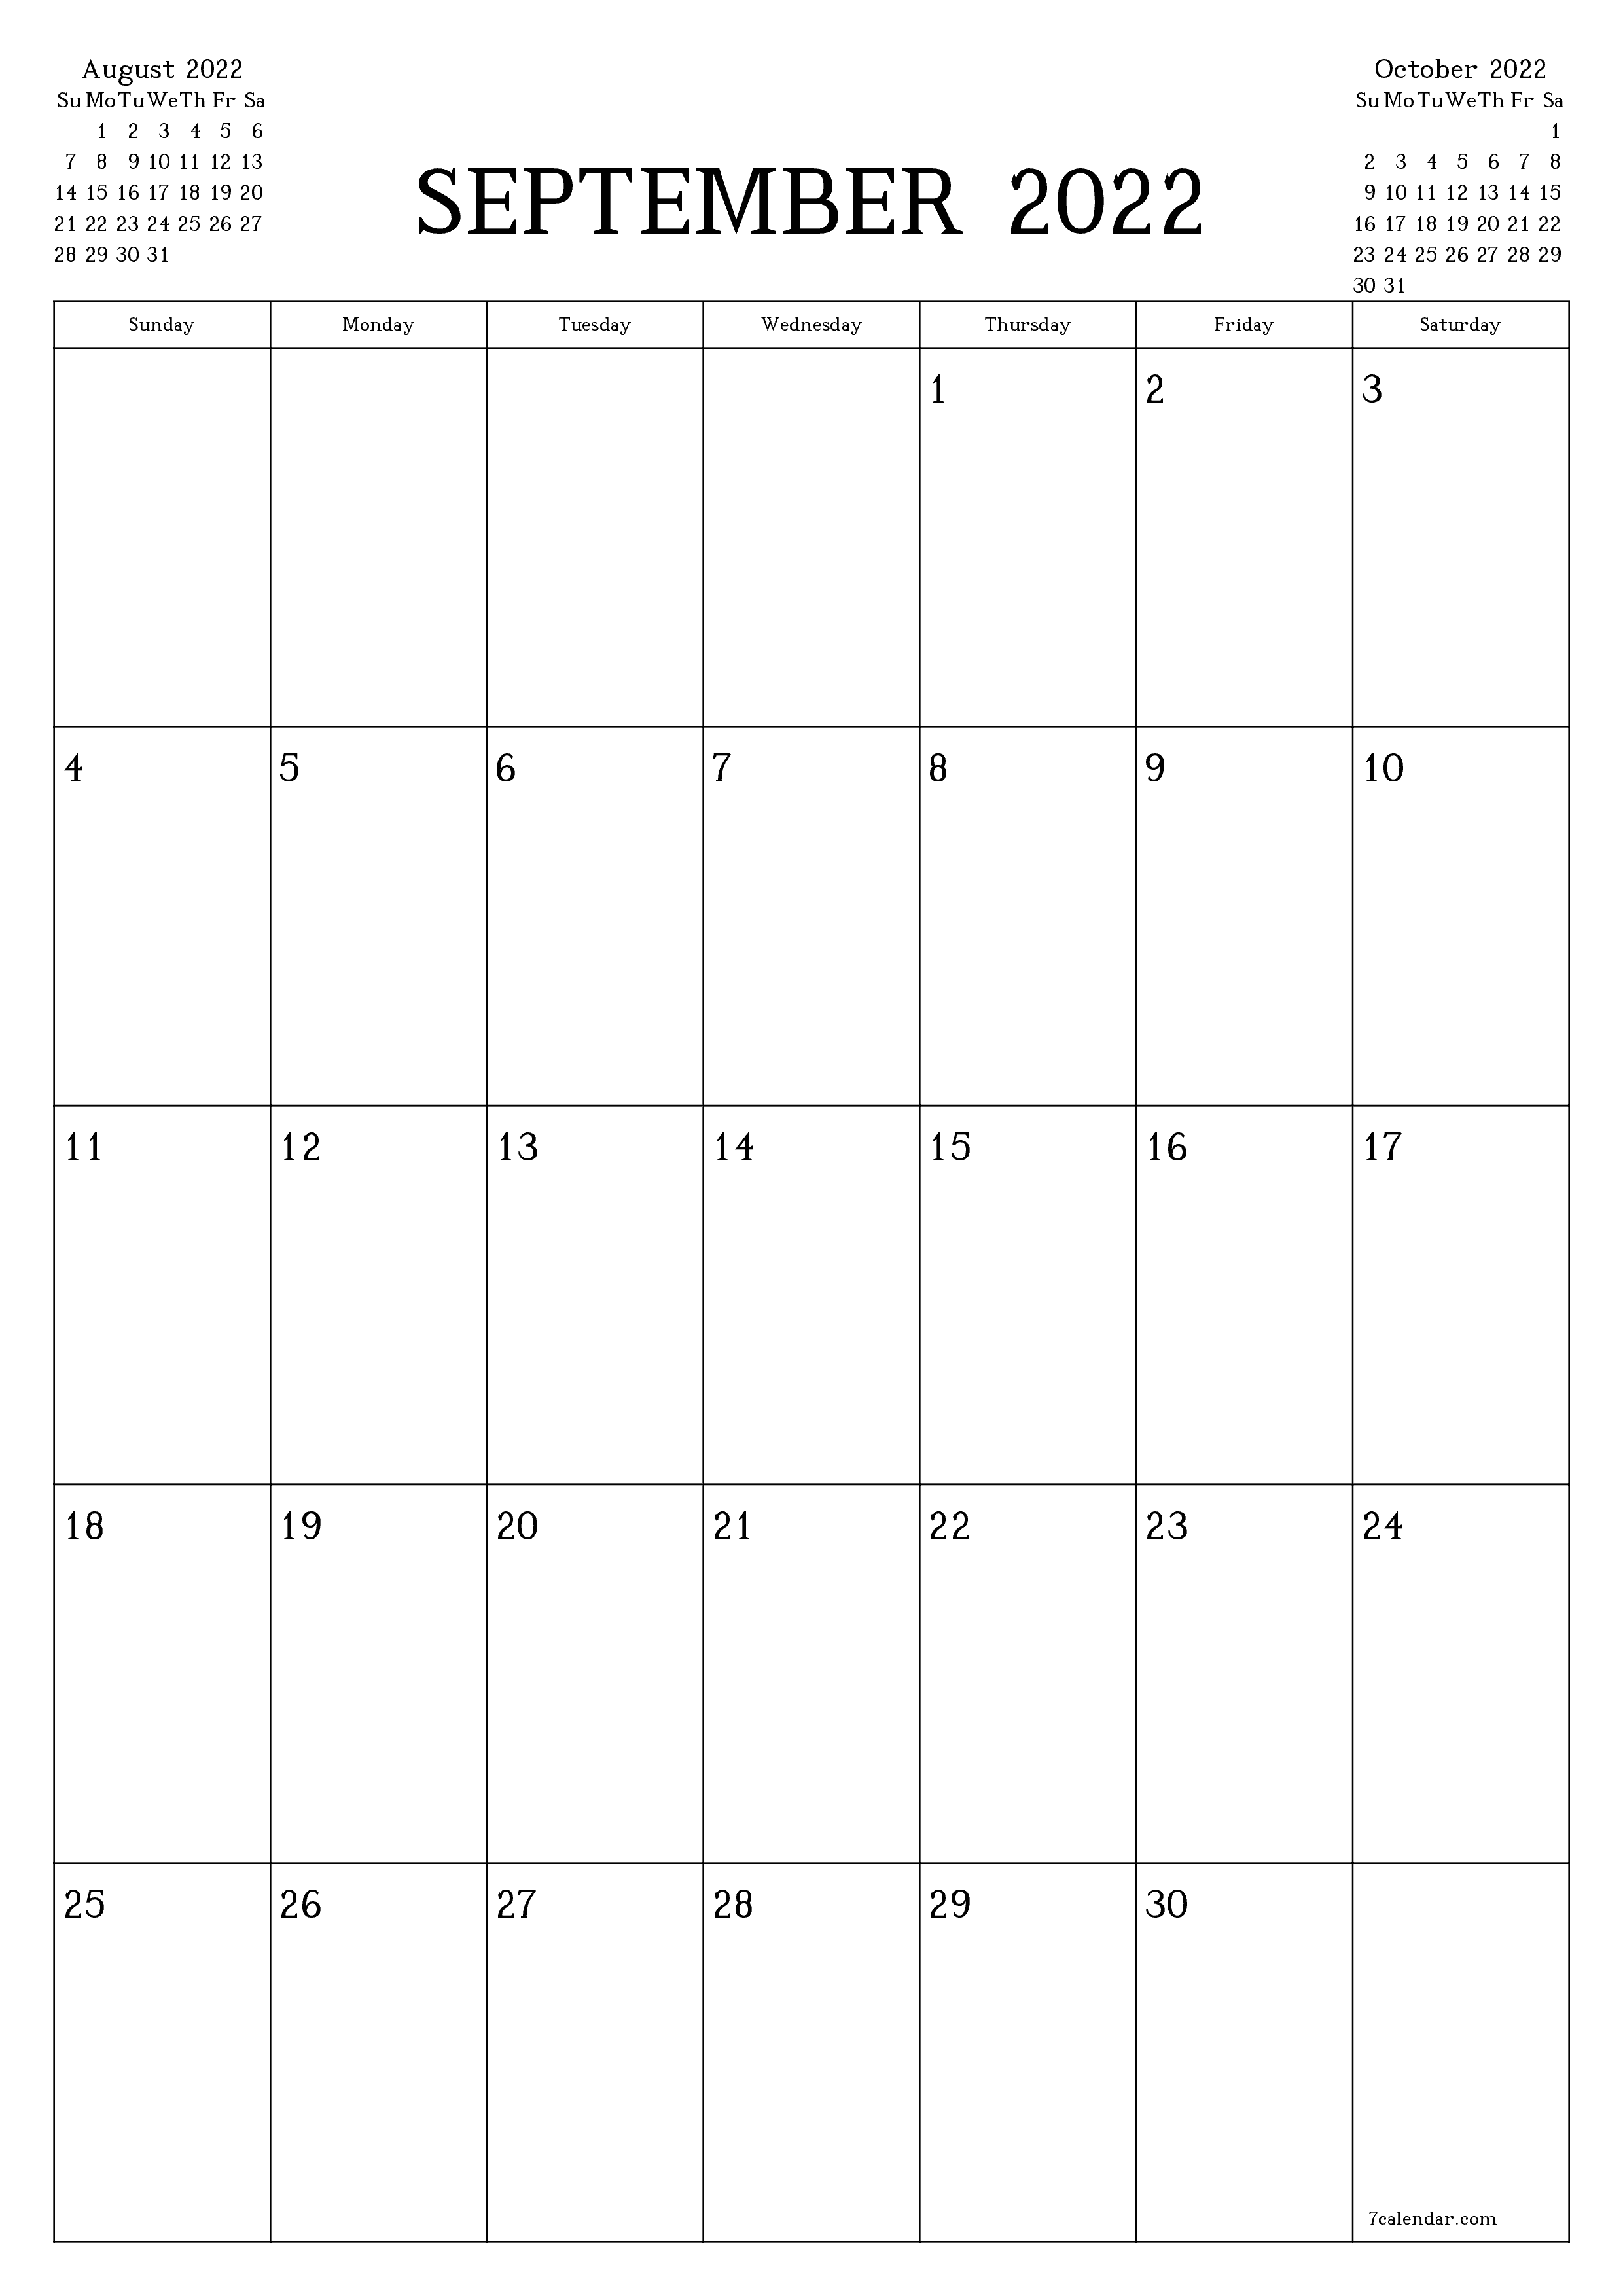 Blank monthly calendar planner for month September 2022 with notes save and print to PDF PNG English - 7calendar.com